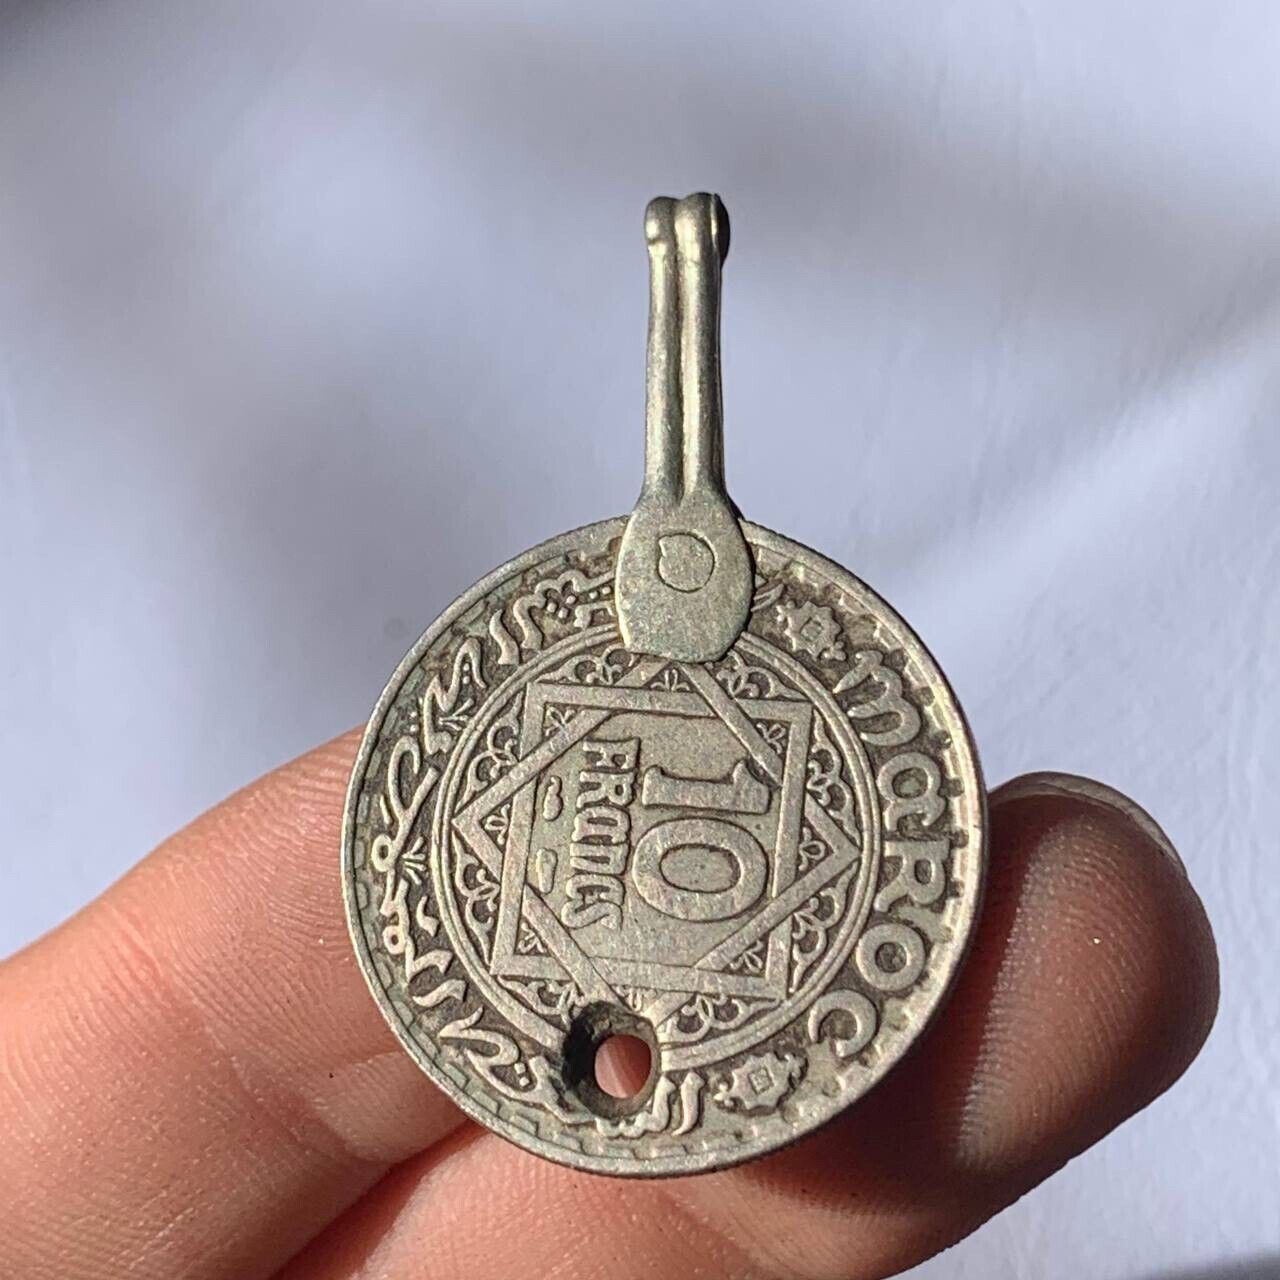 VERY RARE ANCIENT SILVER COLOR OLD MOROCCAN PENDANT COIN AMULET ISLAMIC ARABIC